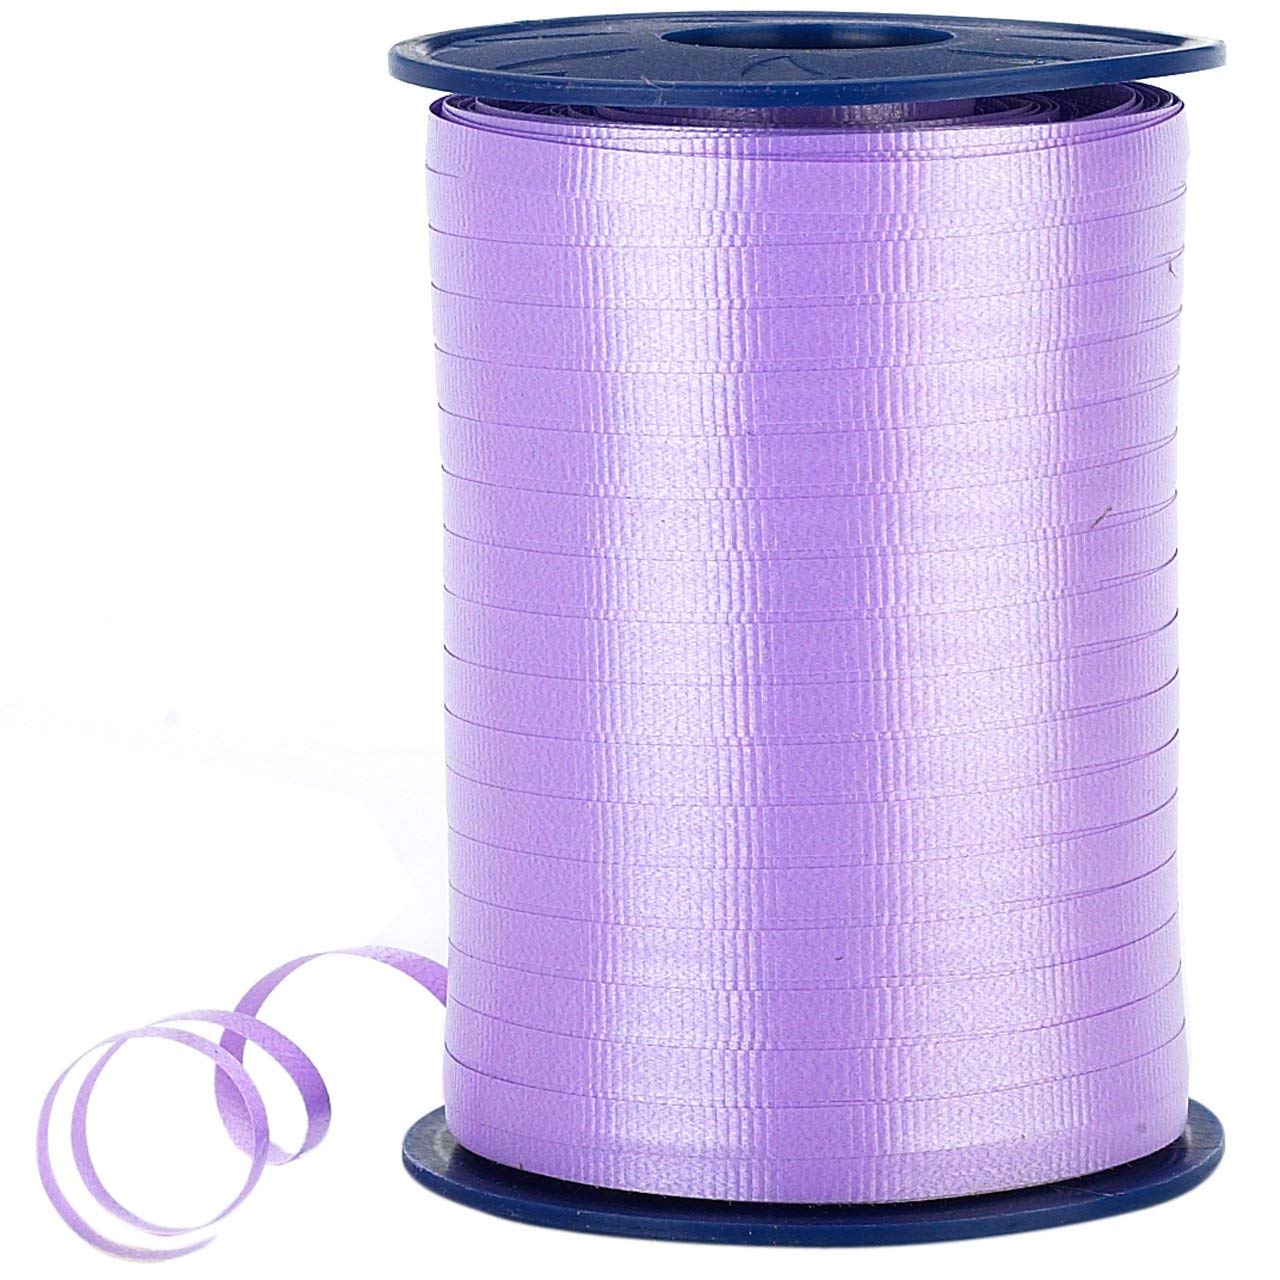 Morex Poly Crimped Curling Ribbon, 3/16-Inch by 500-Yard, Lavender